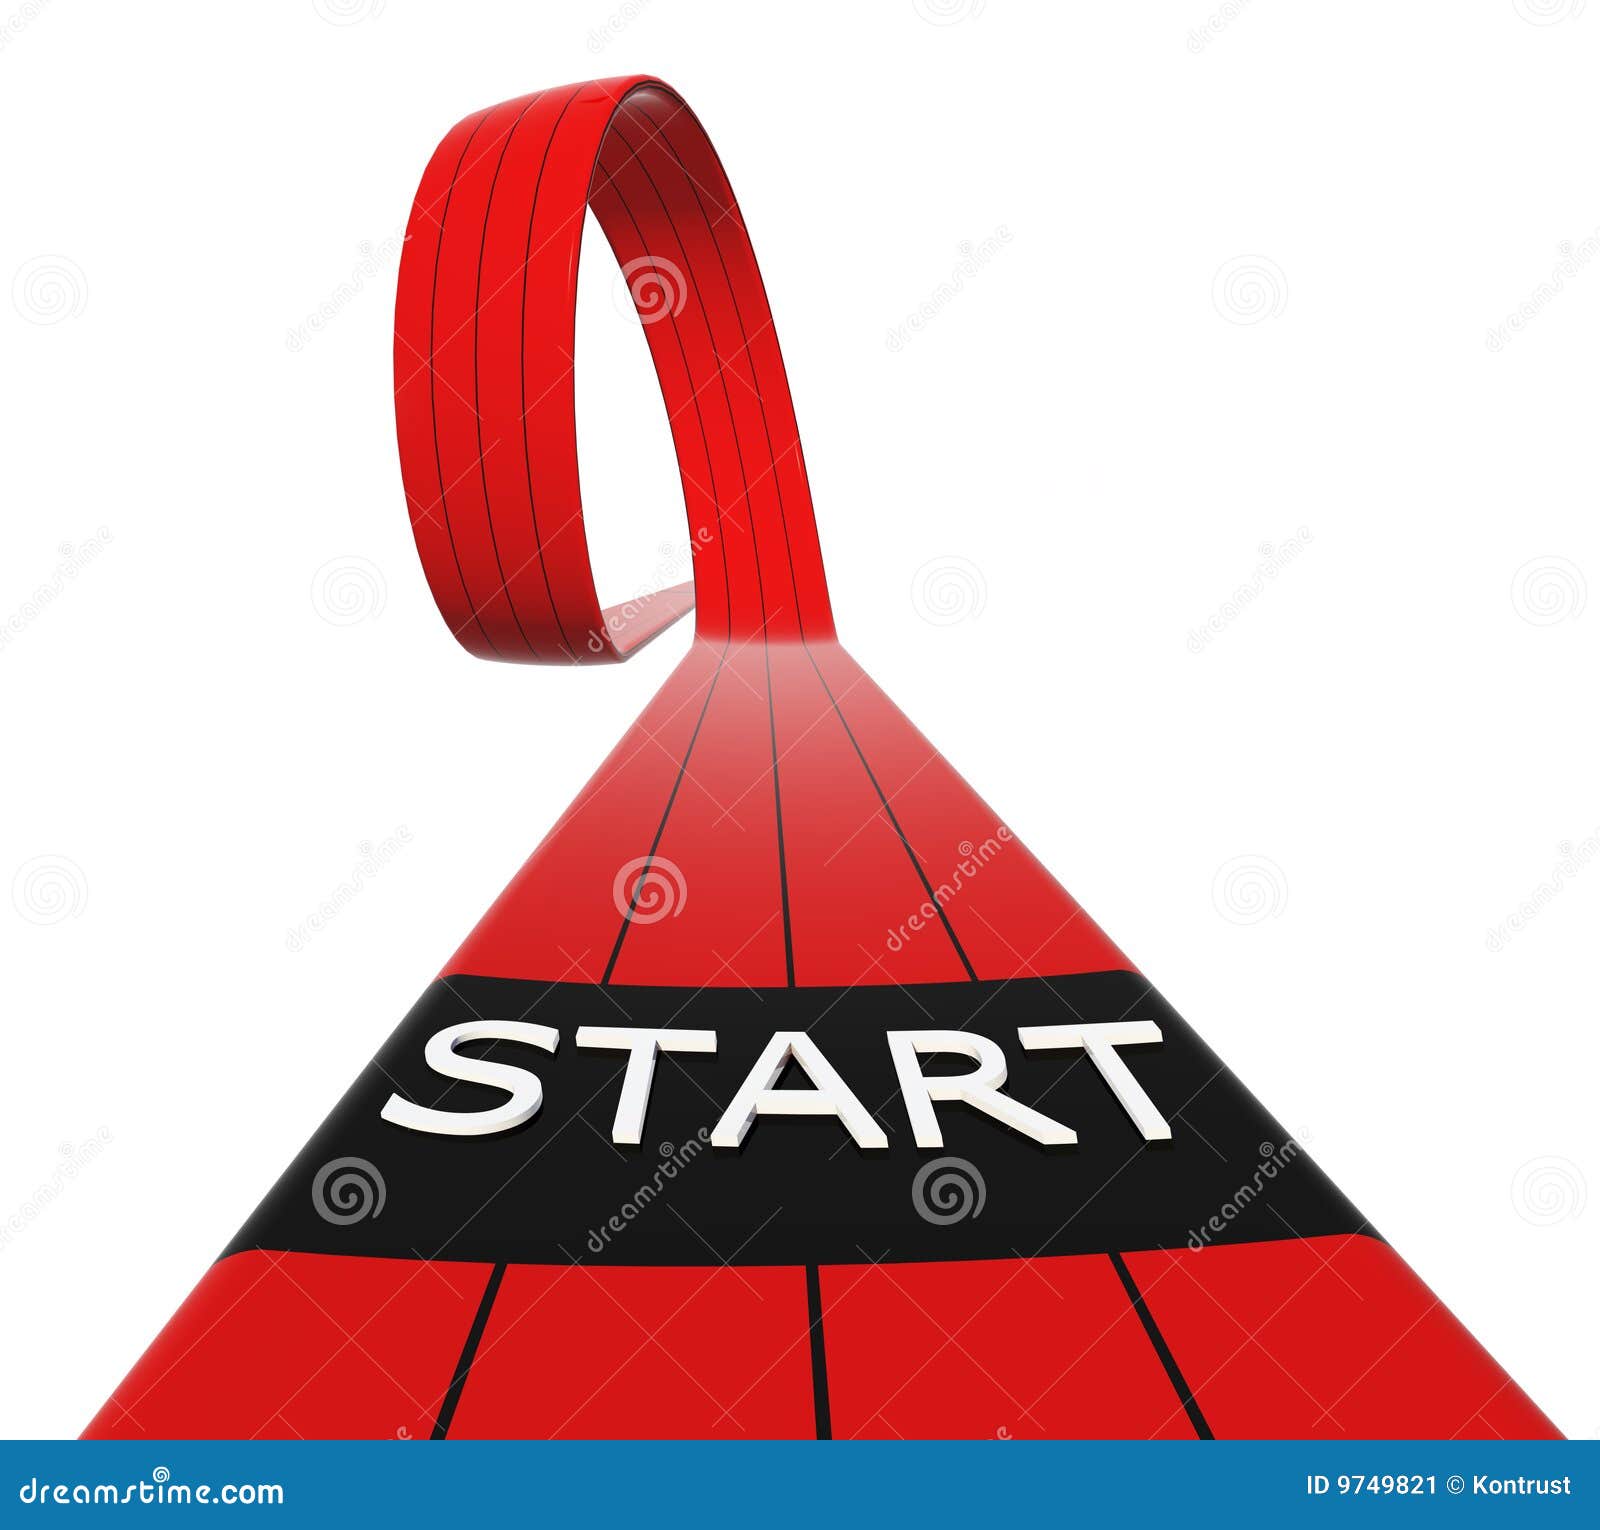 starting line clip art images - photo #7